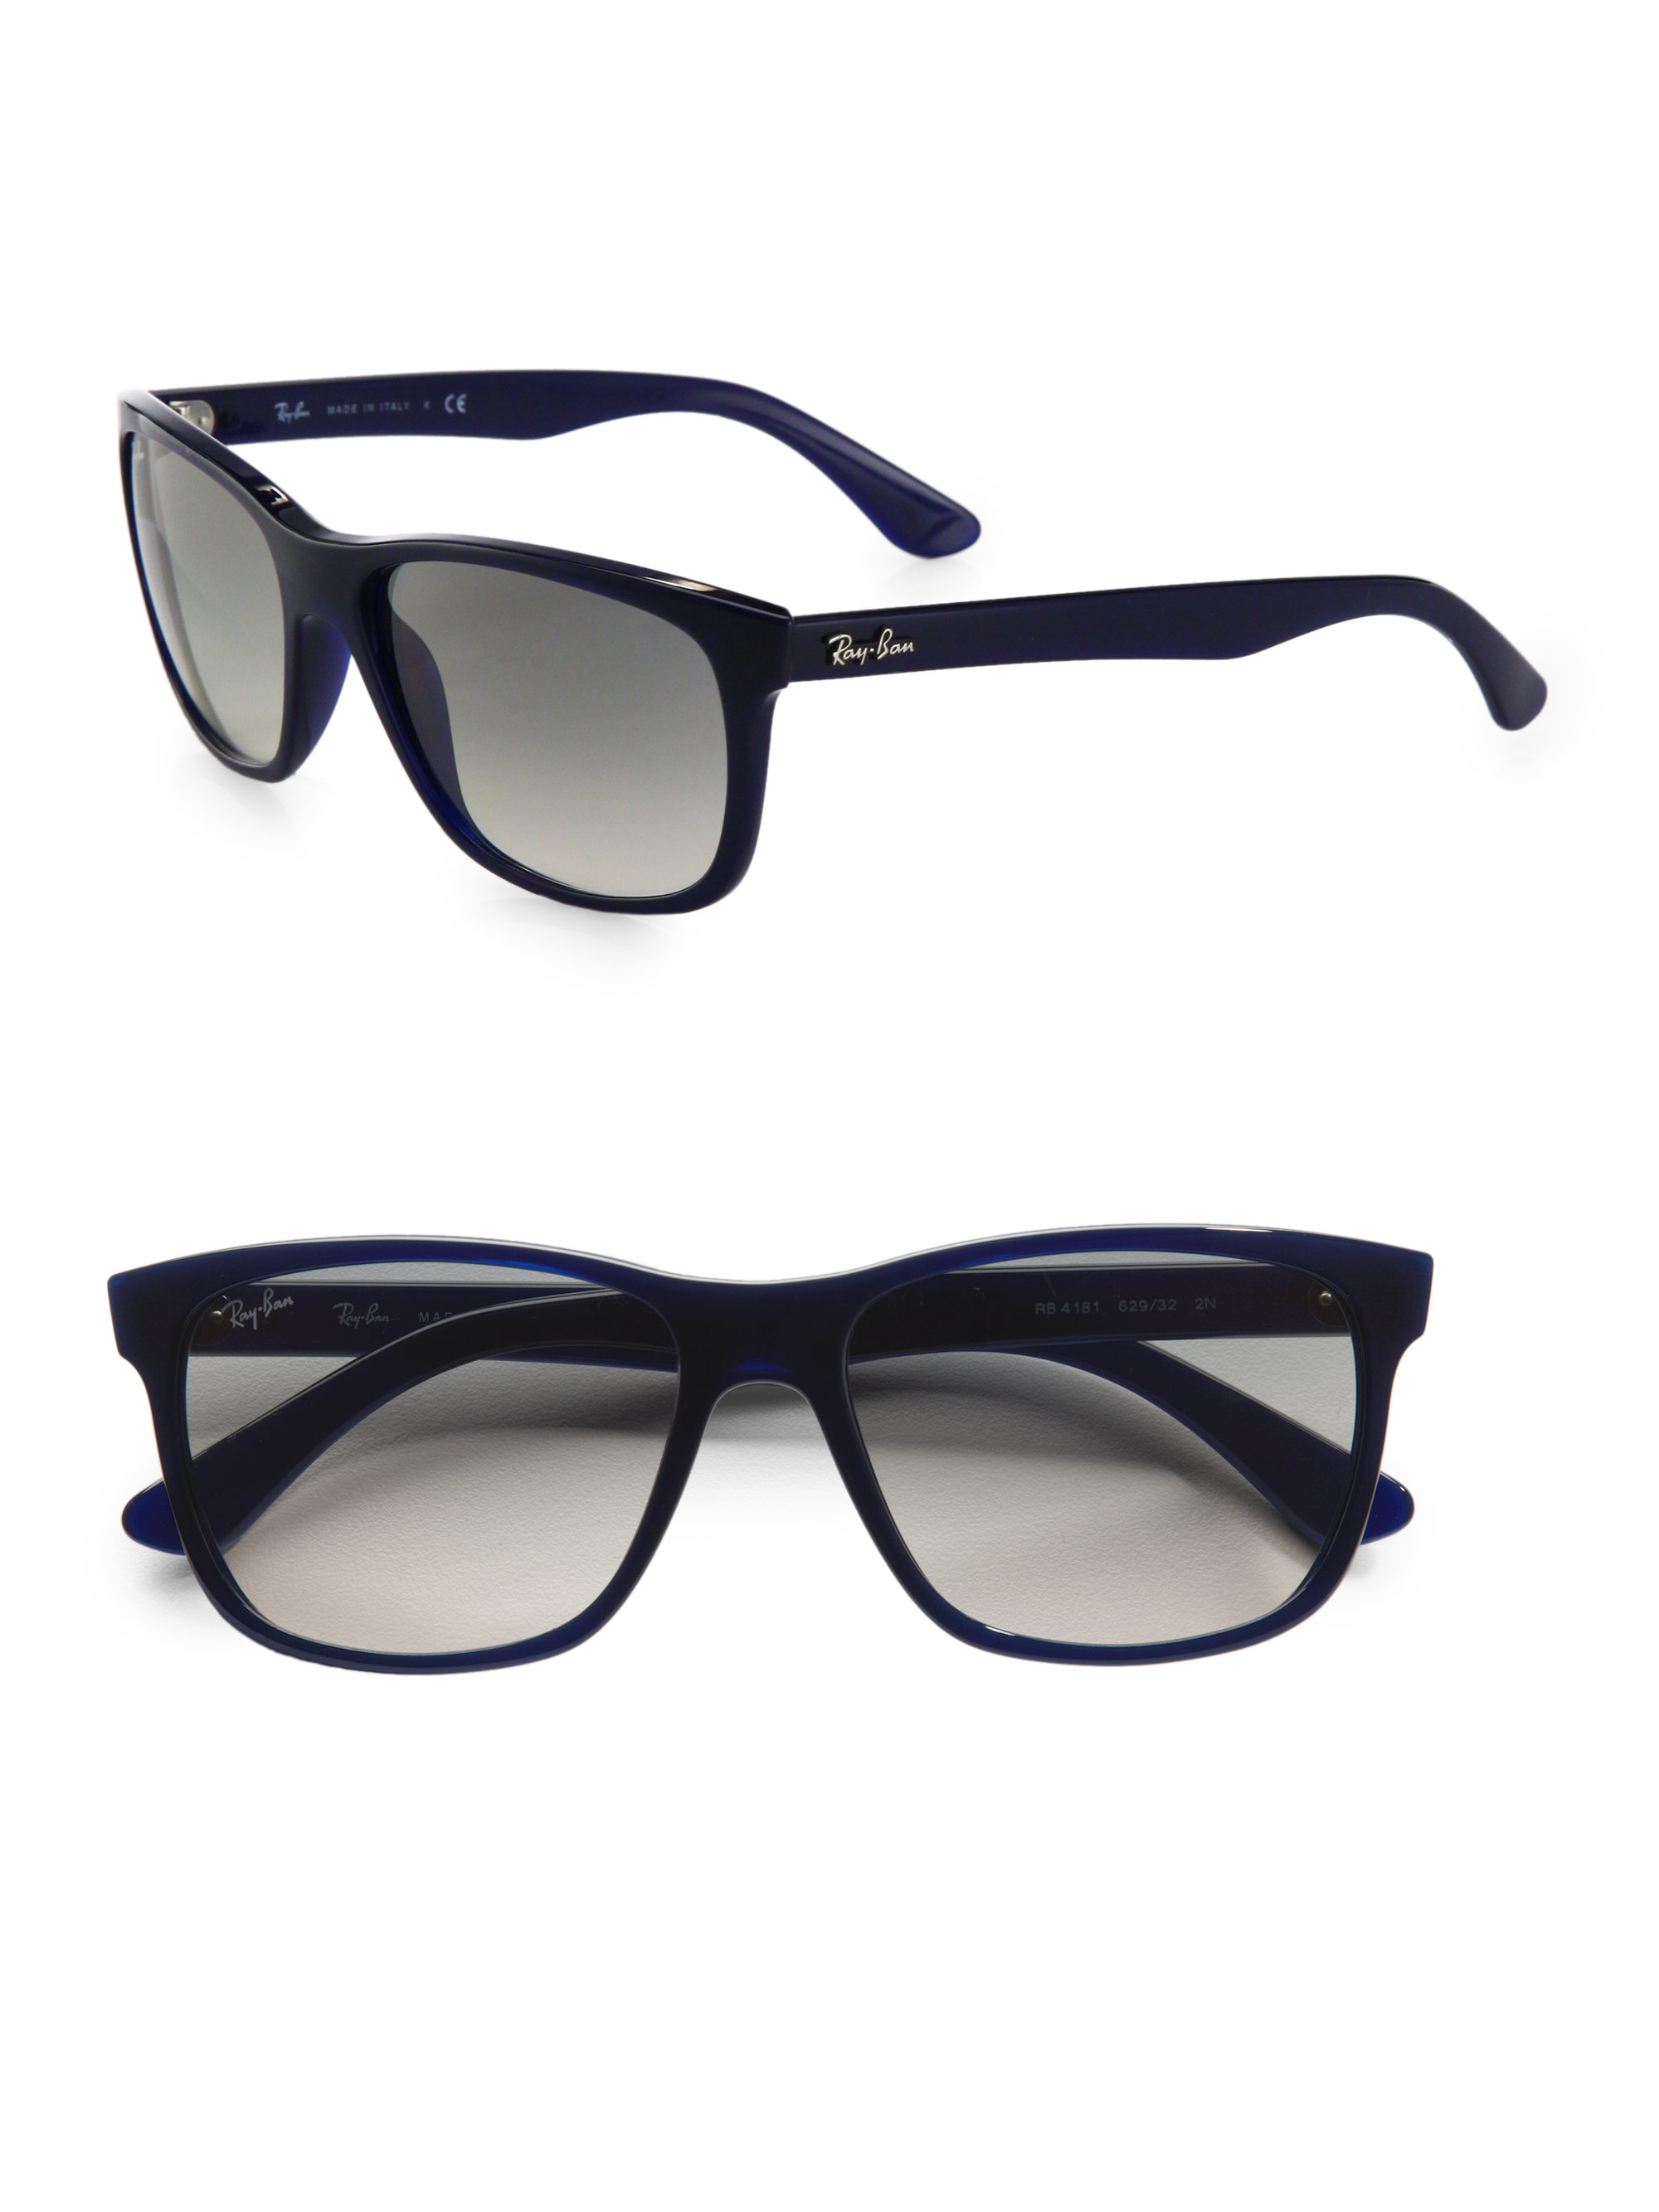 Ray-Ban Square Top Acetate Sunglasses in Black | Lyst